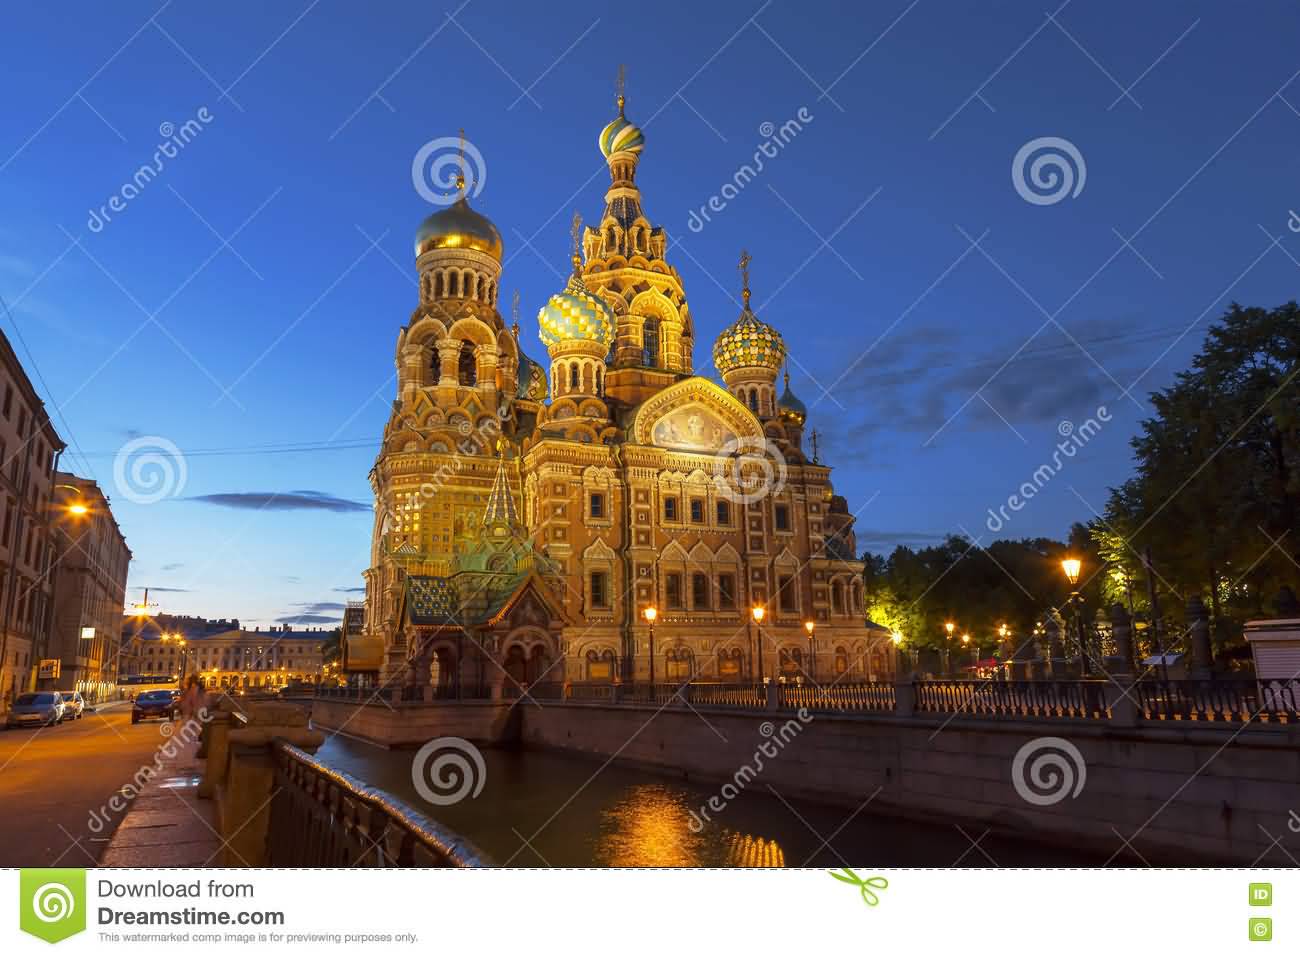 Night Picture Of The Church Of The Savior On Blood In Saint Petersburg, Russia